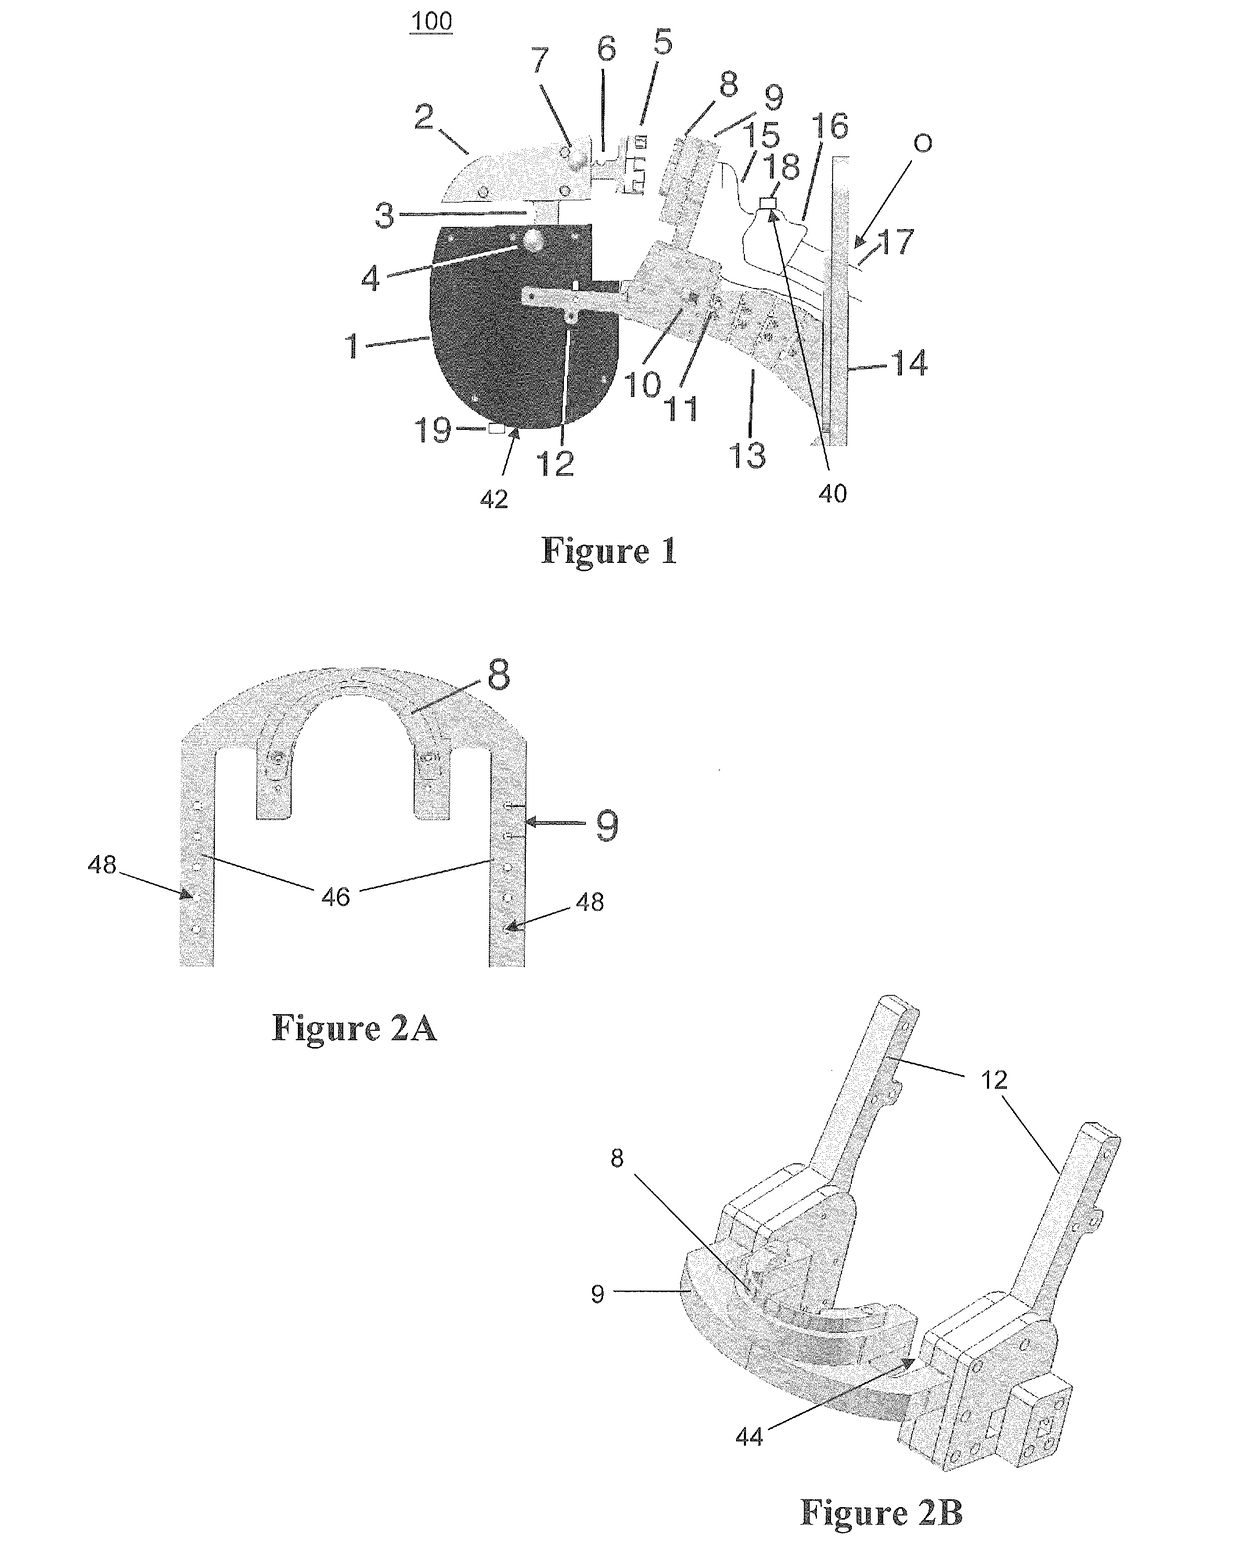 Parametrically adjustable airway training mannequin with instrumented parameter assessment